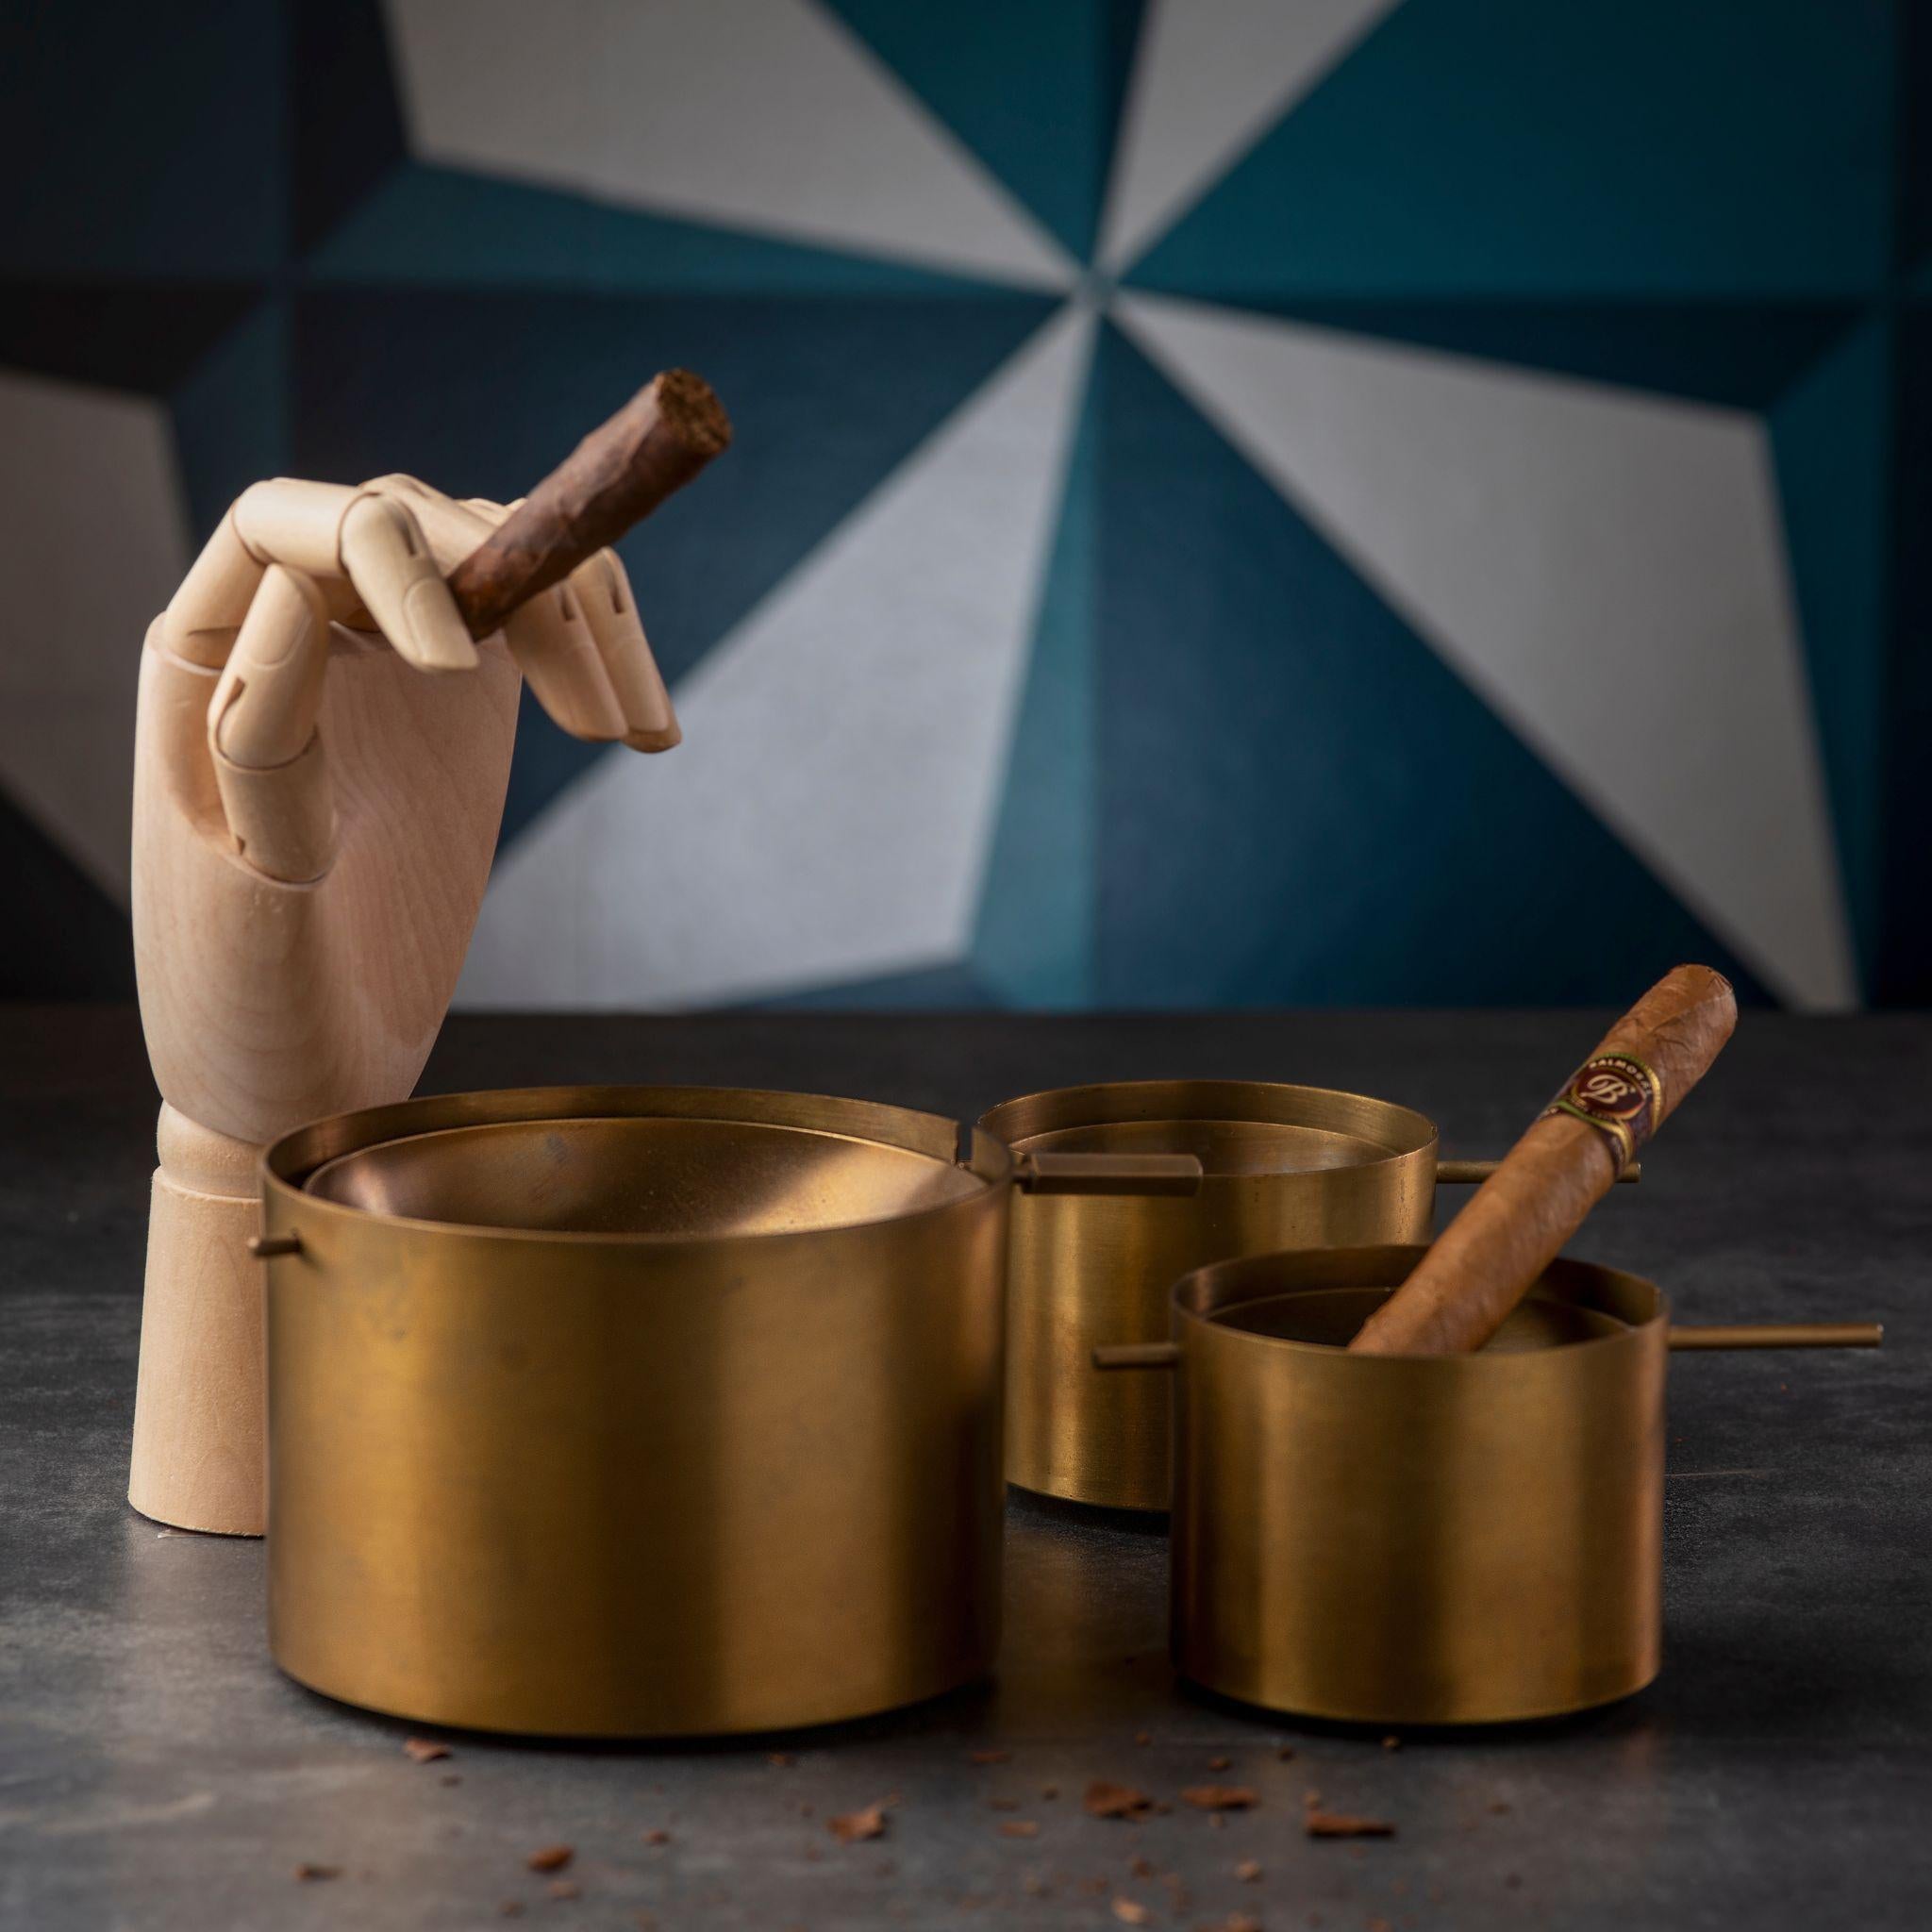 Elevate your home decor with our brass tilting ashtray, the perfect addition for any vintage or retro-inspired space. Made from high-quality brass and featuring a tilting mechanism for easy ash disposal, this ashtray is both functional and stylish.